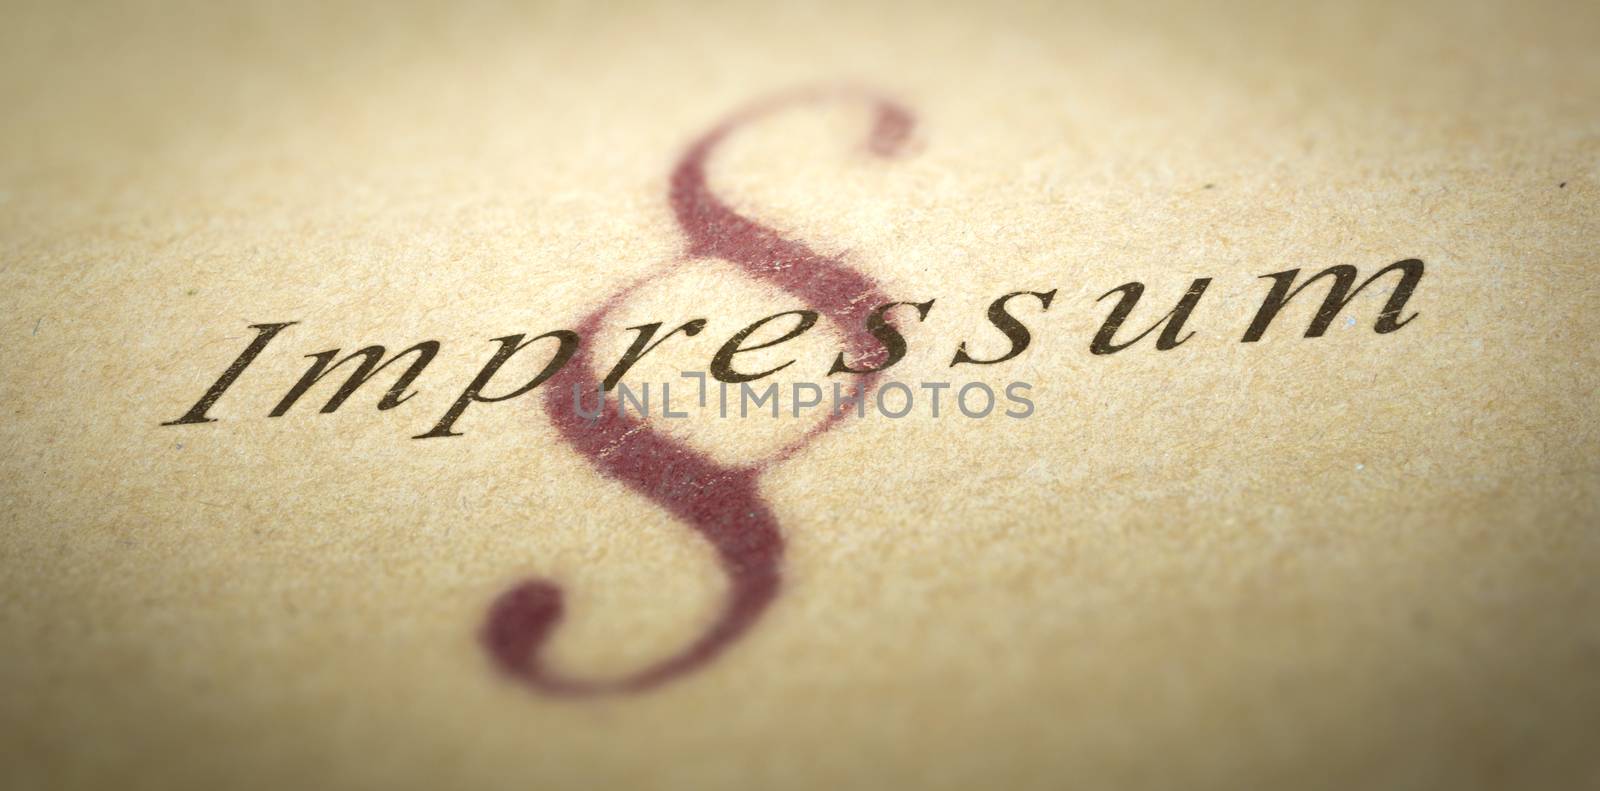 Word Impressum printed on a paper texture with blur effect and silcrow symbol